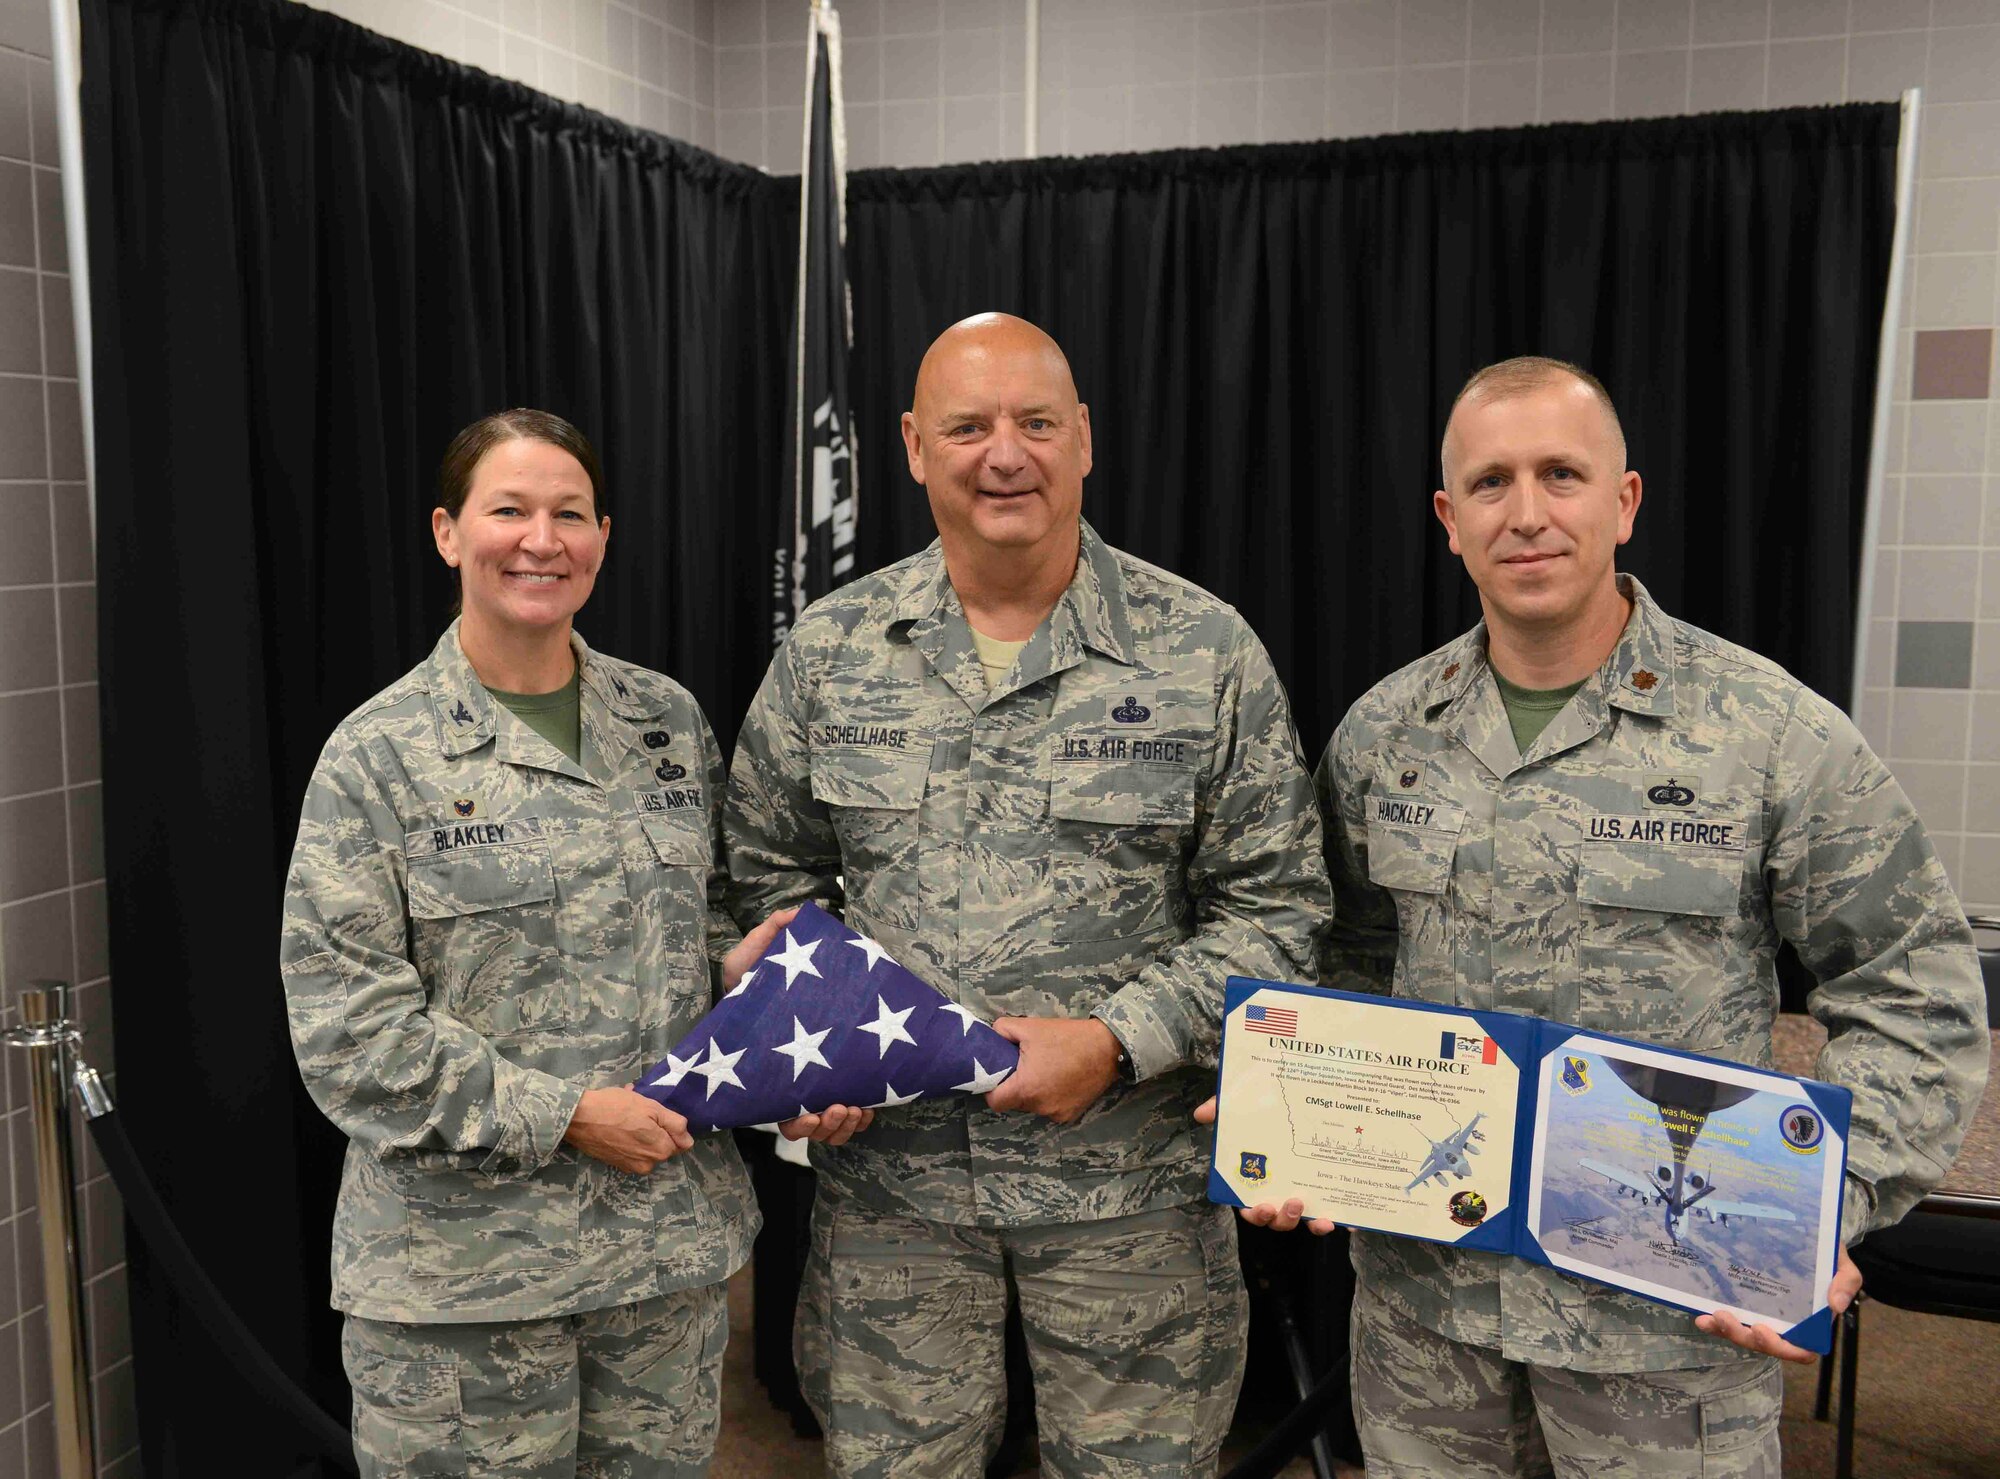 Command Chief Master Sergeant Ed Schellhase (center) receives an honorary flag from Colonel Monica Blakely (left) and Major Glen Hackley (right) at the 132d Wing in Des Moines, Iowa on Sunday August 2, 2015.  (U.S. Air National Guard photo by Senior Airman Michael J. Kelly/Released)